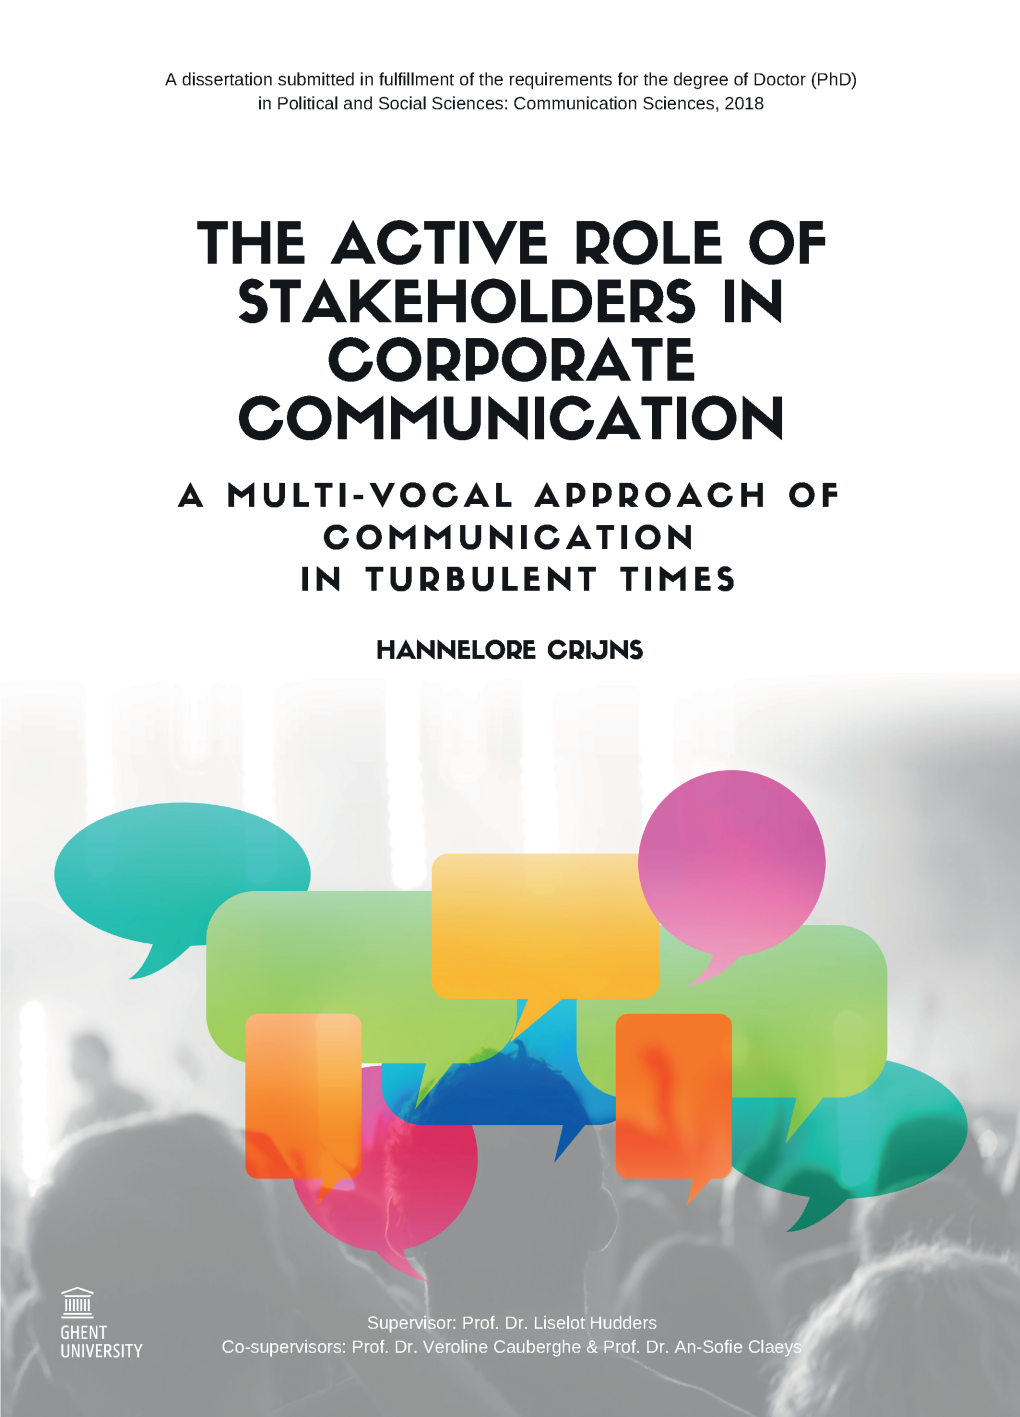 The Active Role of Stakeholders in Corporate Communication: a Multi-Vocal Approach of Communication in Turbulent Times